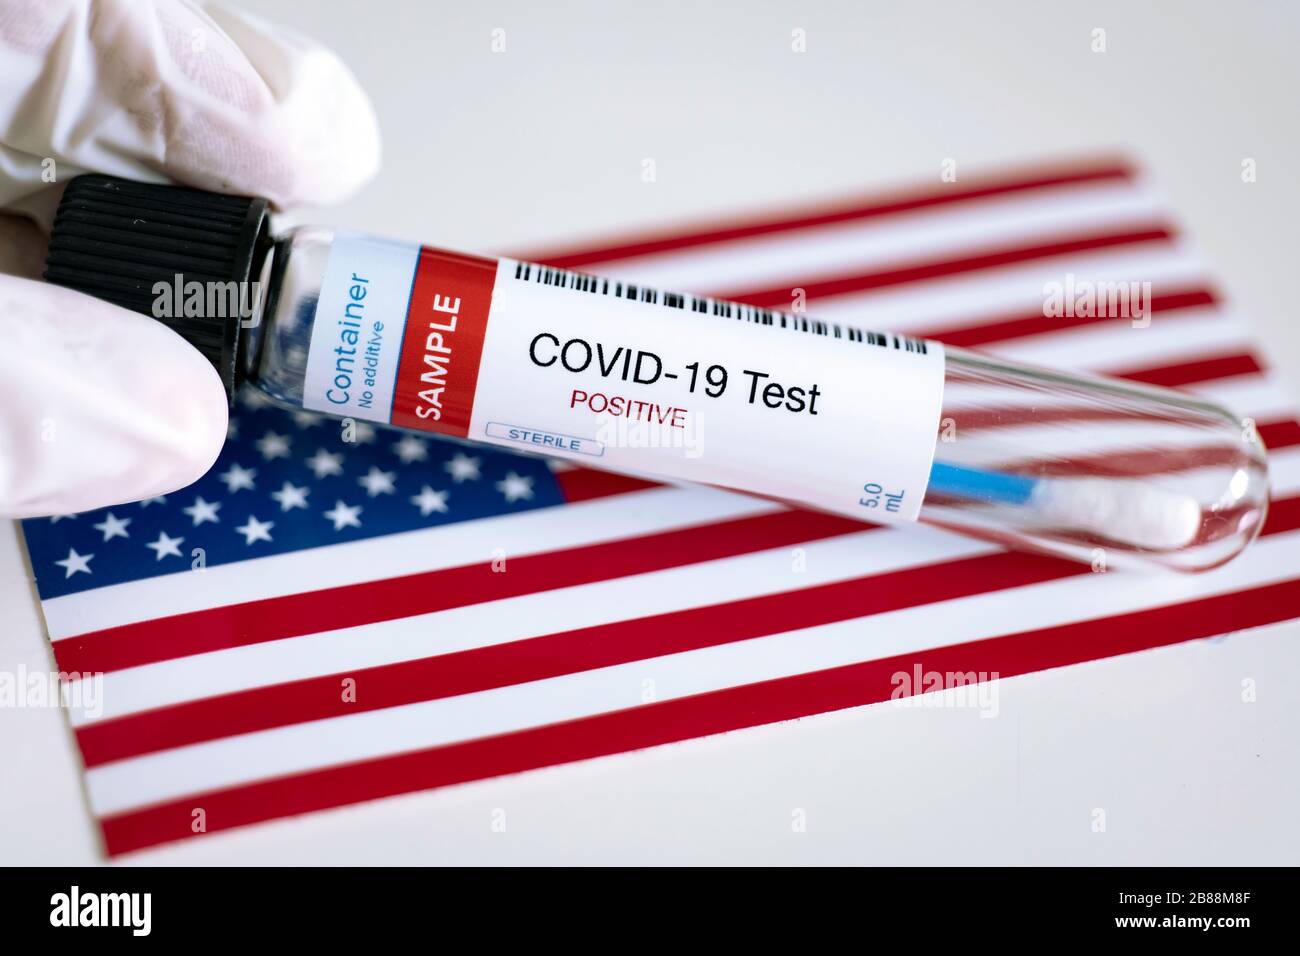 Testing for presence of coronavirus. Tube containing a swab sample that has tested positive for COVID-19. Flag of the United States in the background. Stock Photo